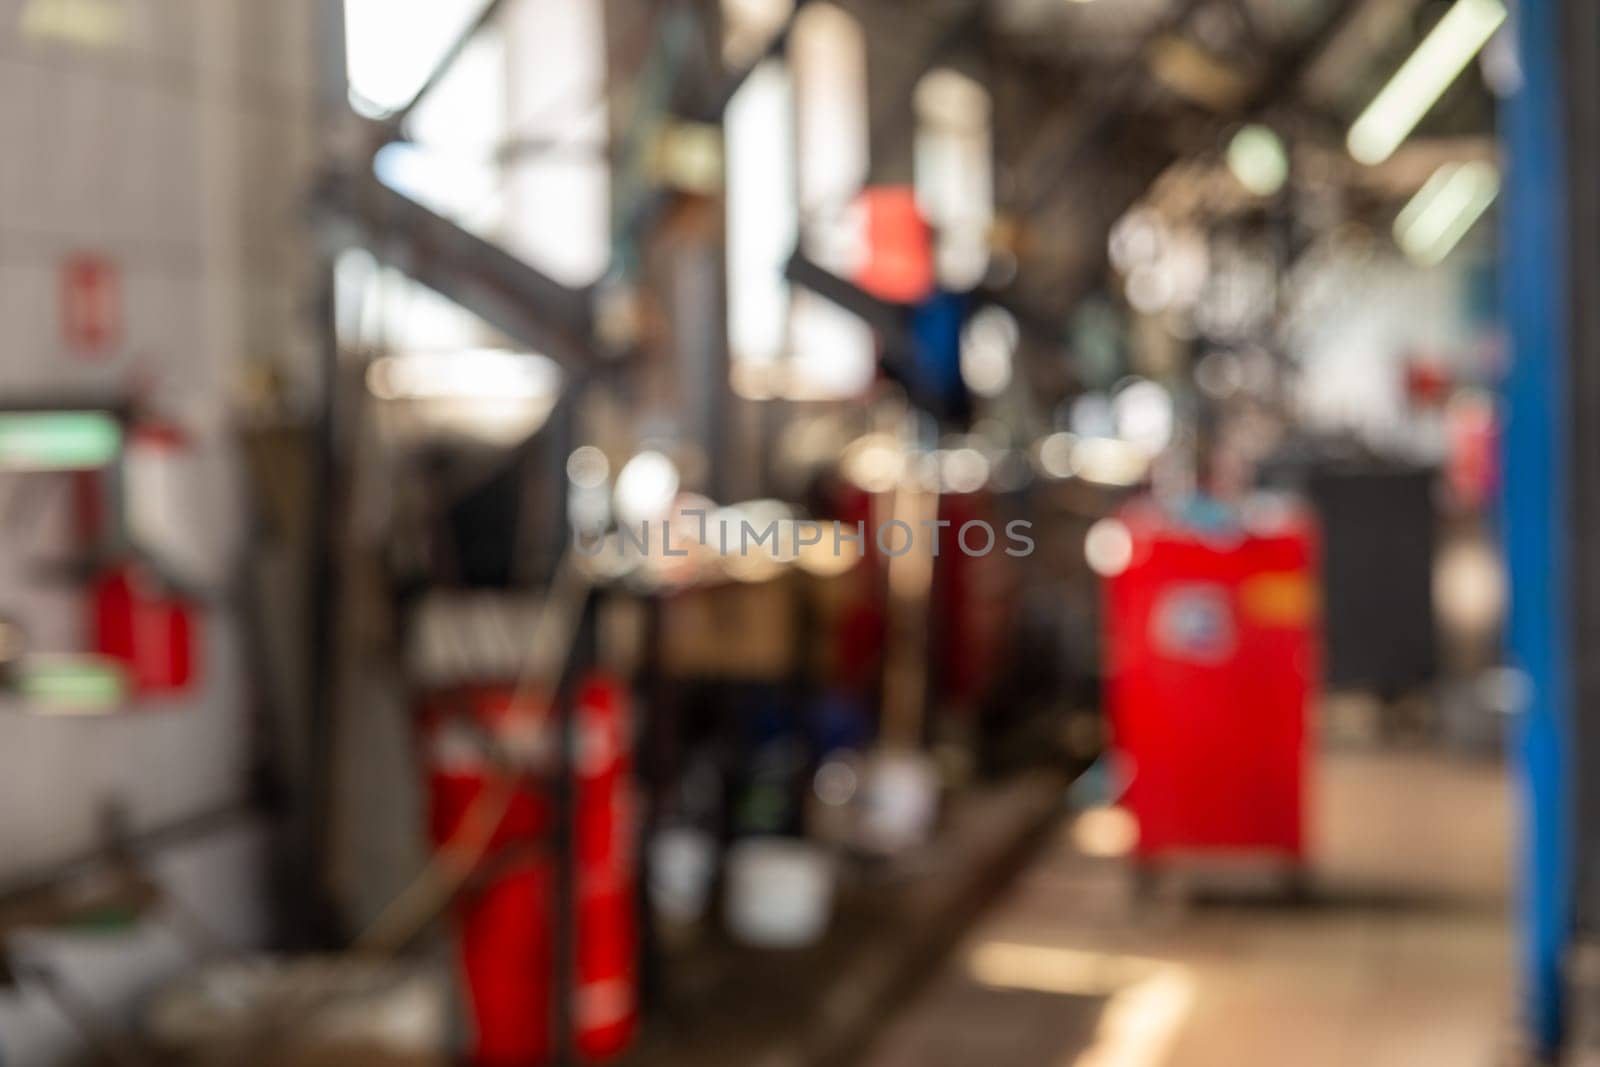 Blurred background image with cars in automobile repair service by BY-_-BY